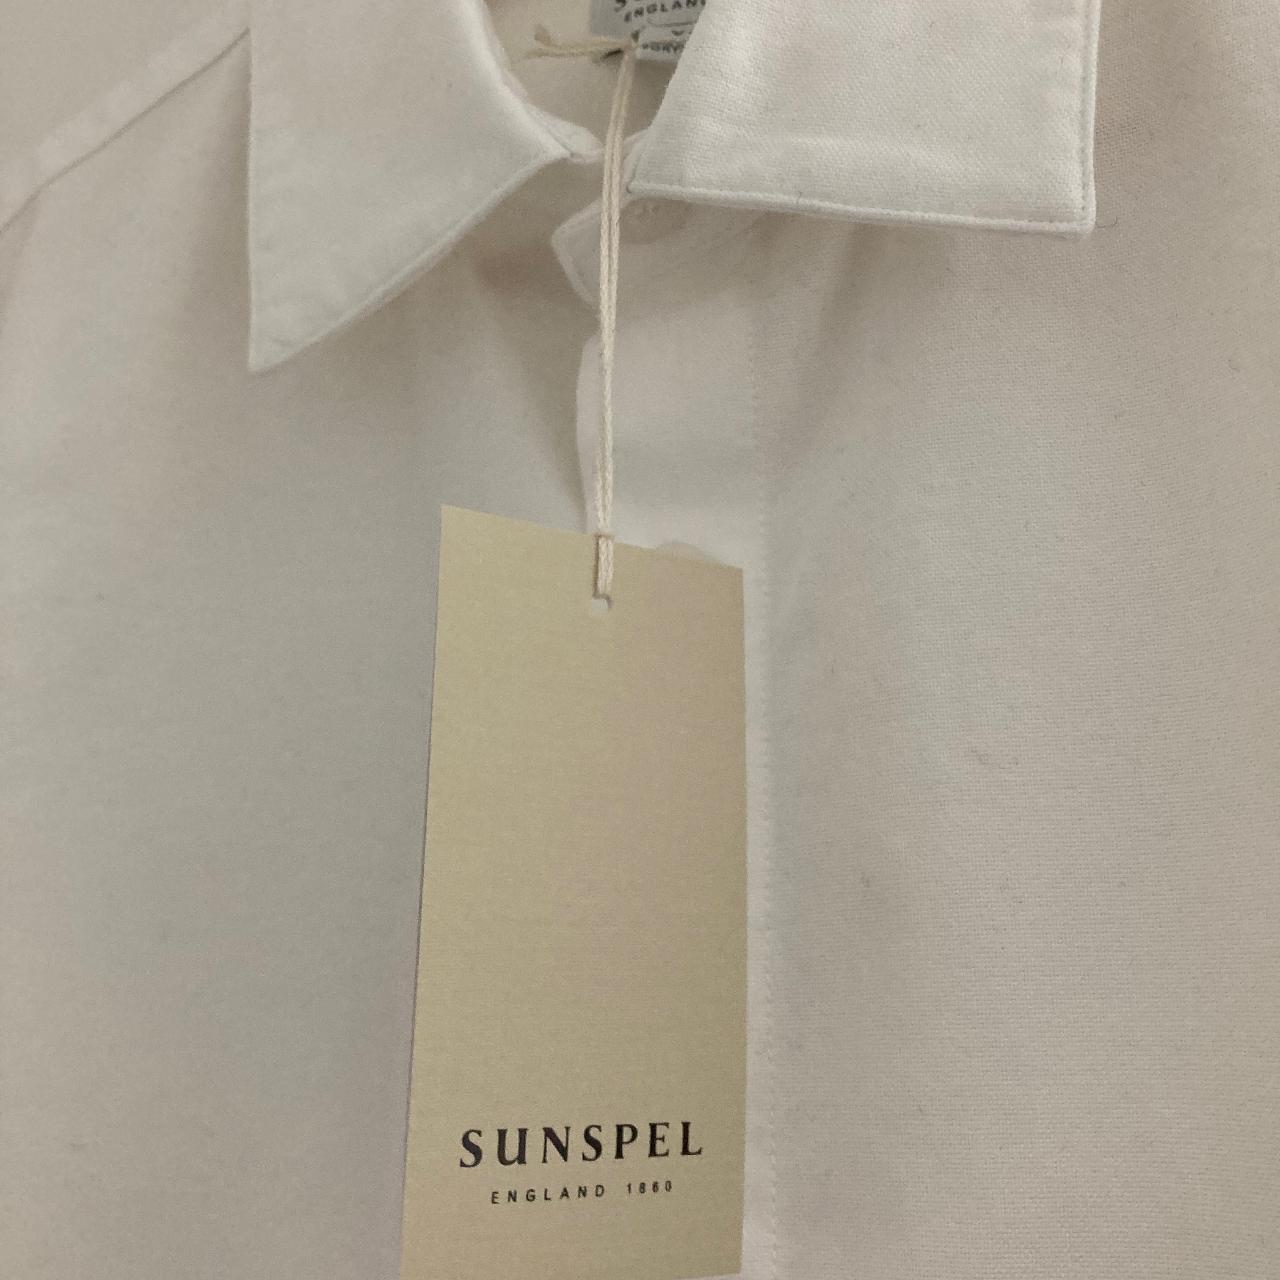 Product Image 4 - Sunspel white oxford shirt

This is